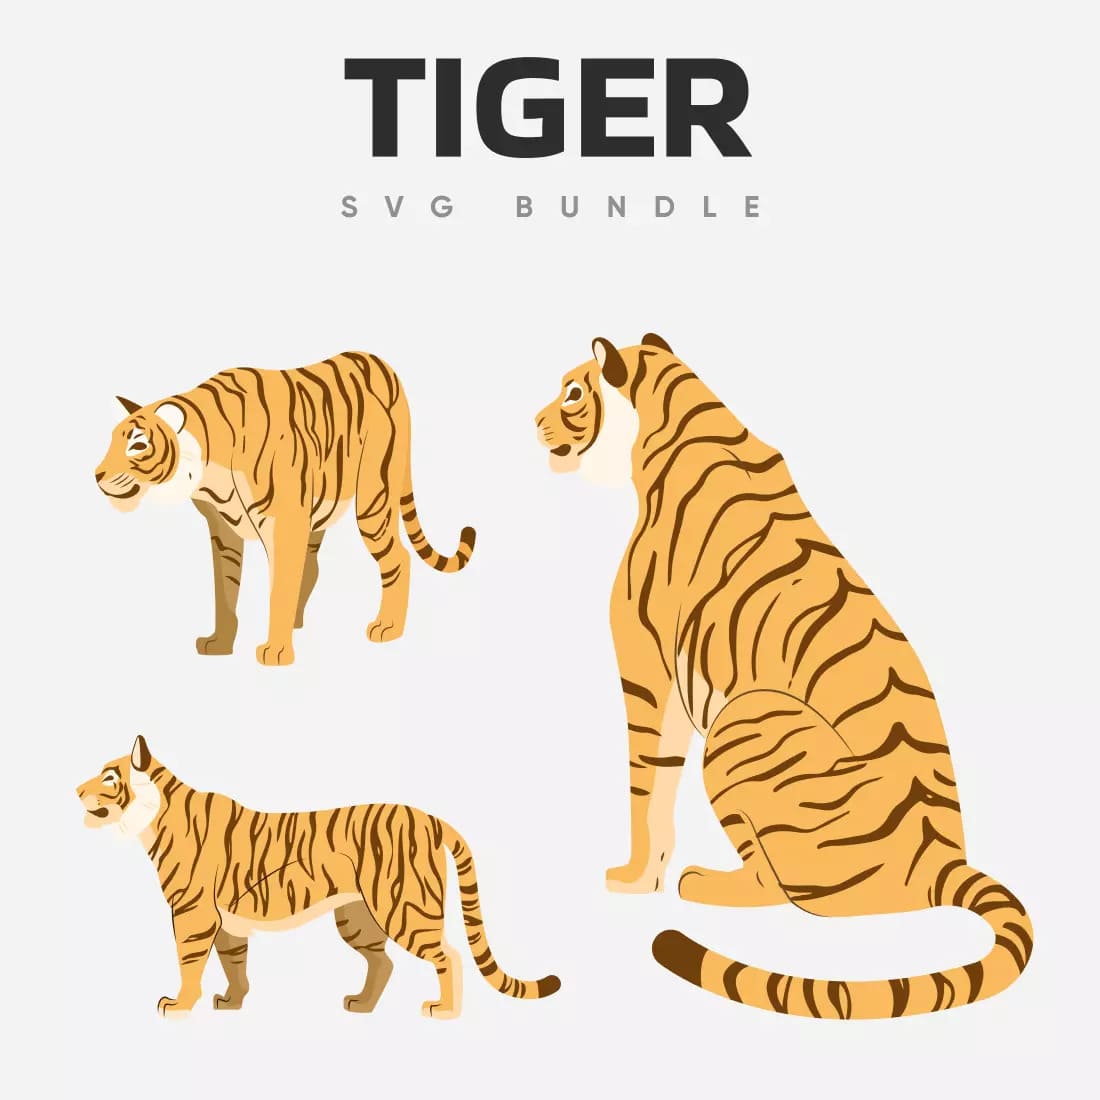 Tiger and a tiger cub are shown on a white background.